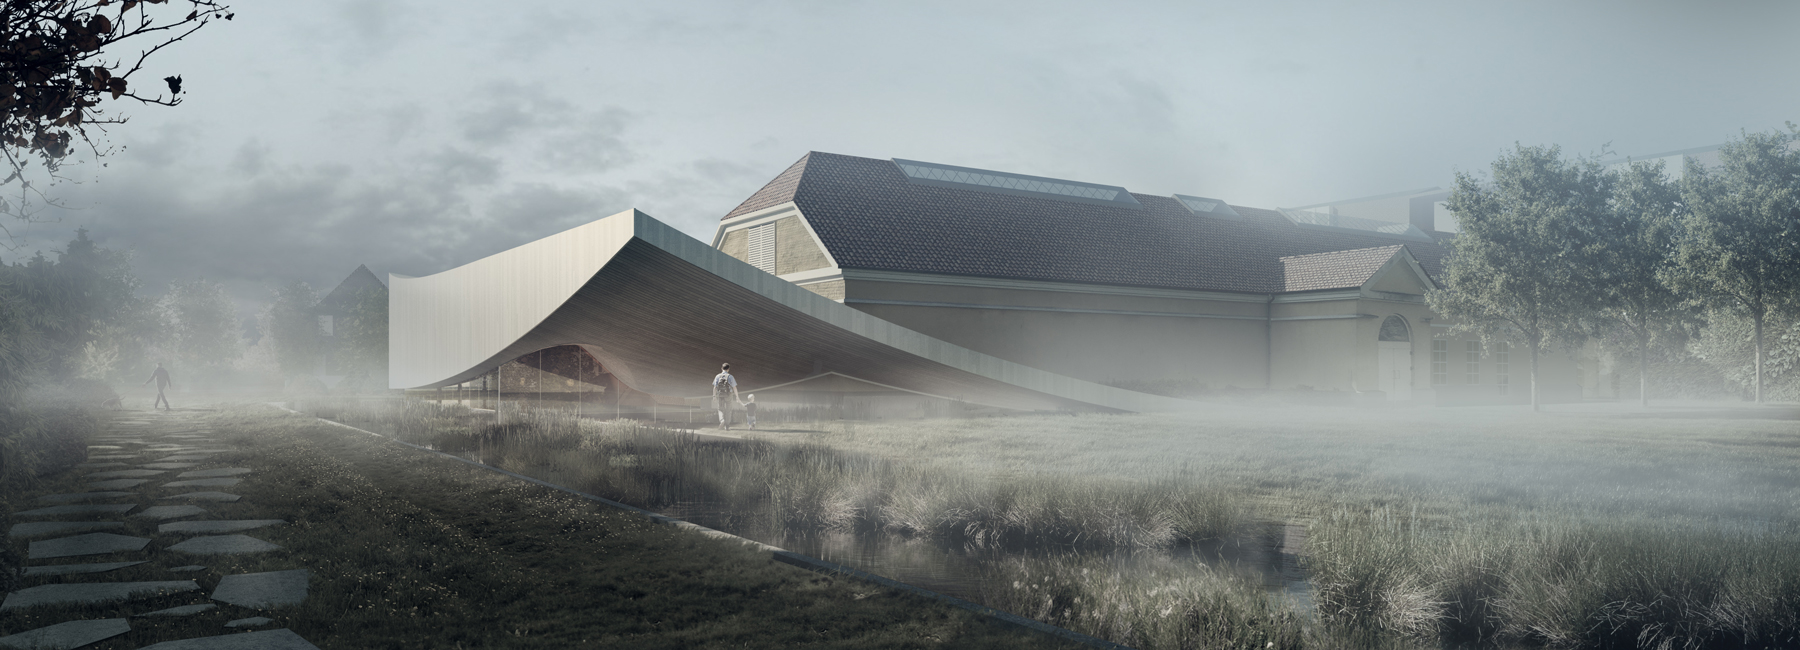 3XN's extension for silkeborg museum in denmark rises from peat landscape